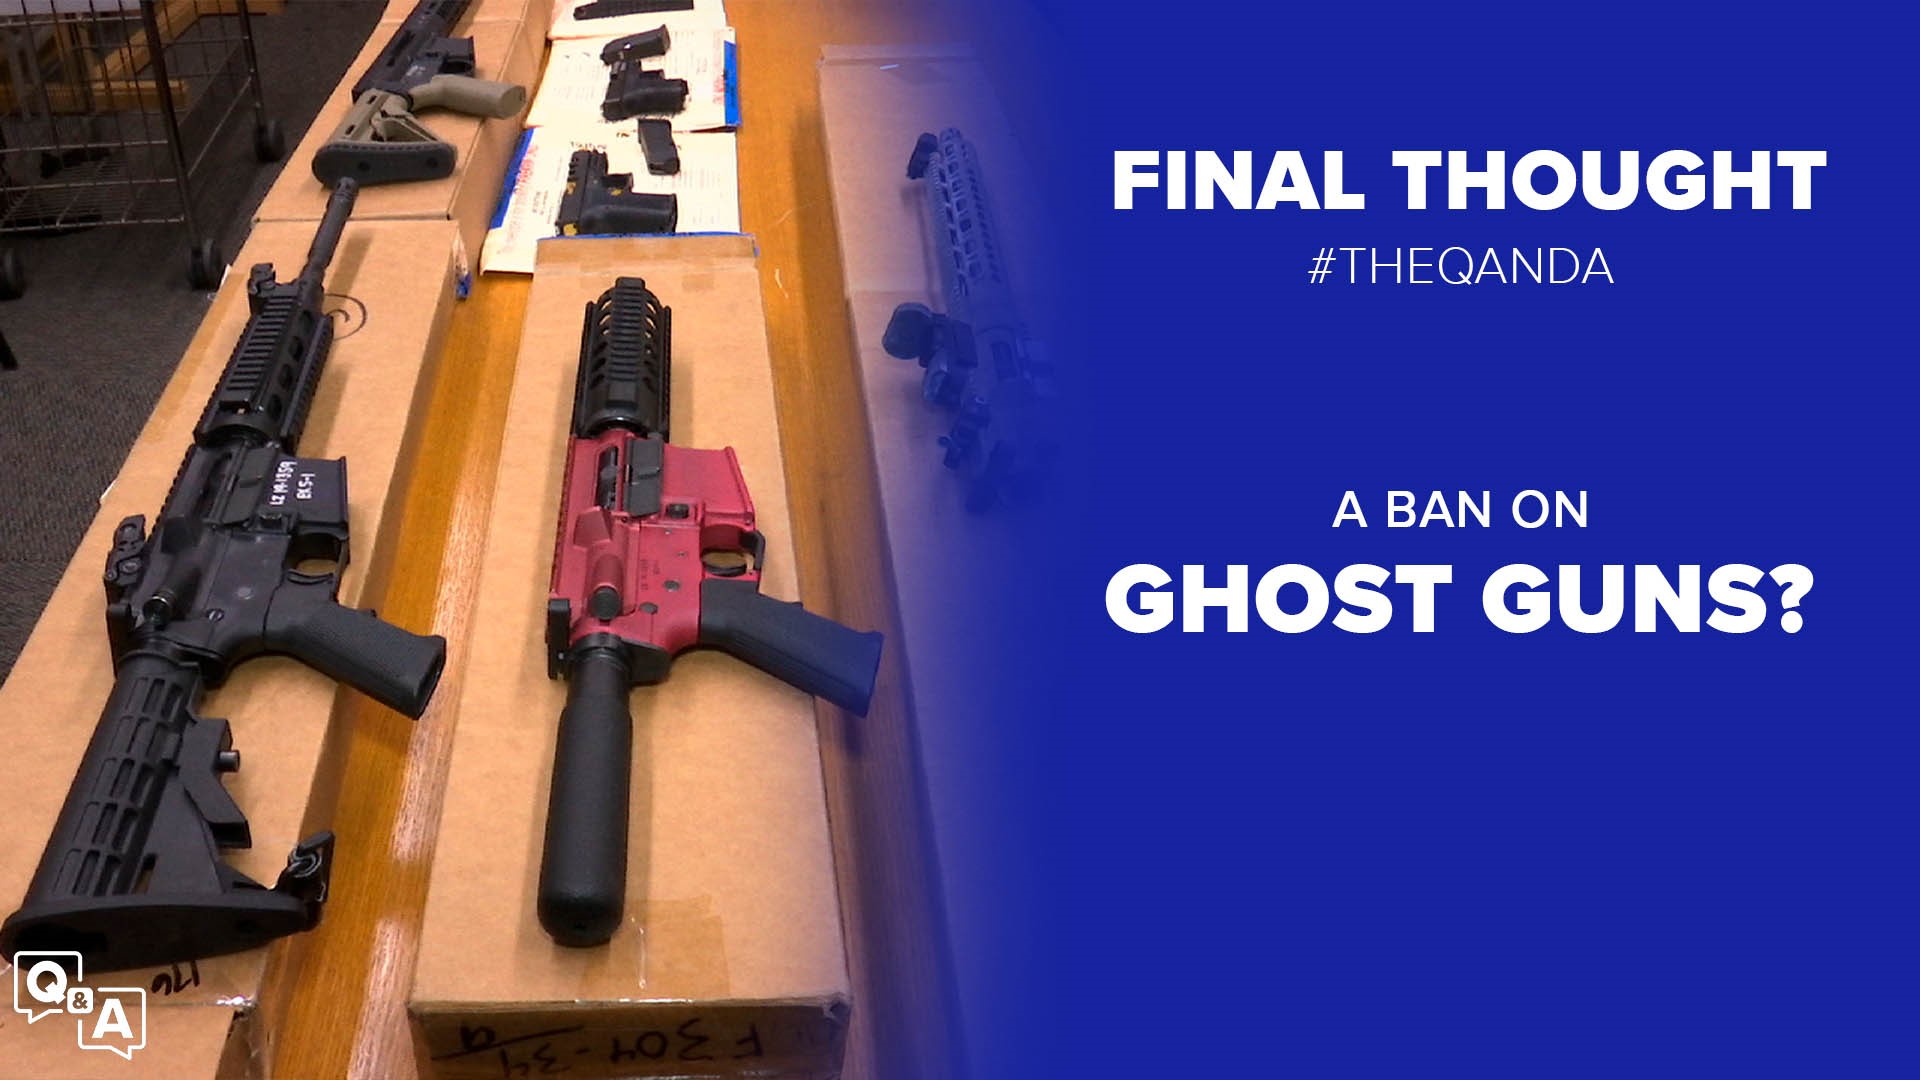 Today Mayor Bowser announced that she is asking the City Council to approve emergency legislation to ban the gun kits and parts that are used to make ghost guns